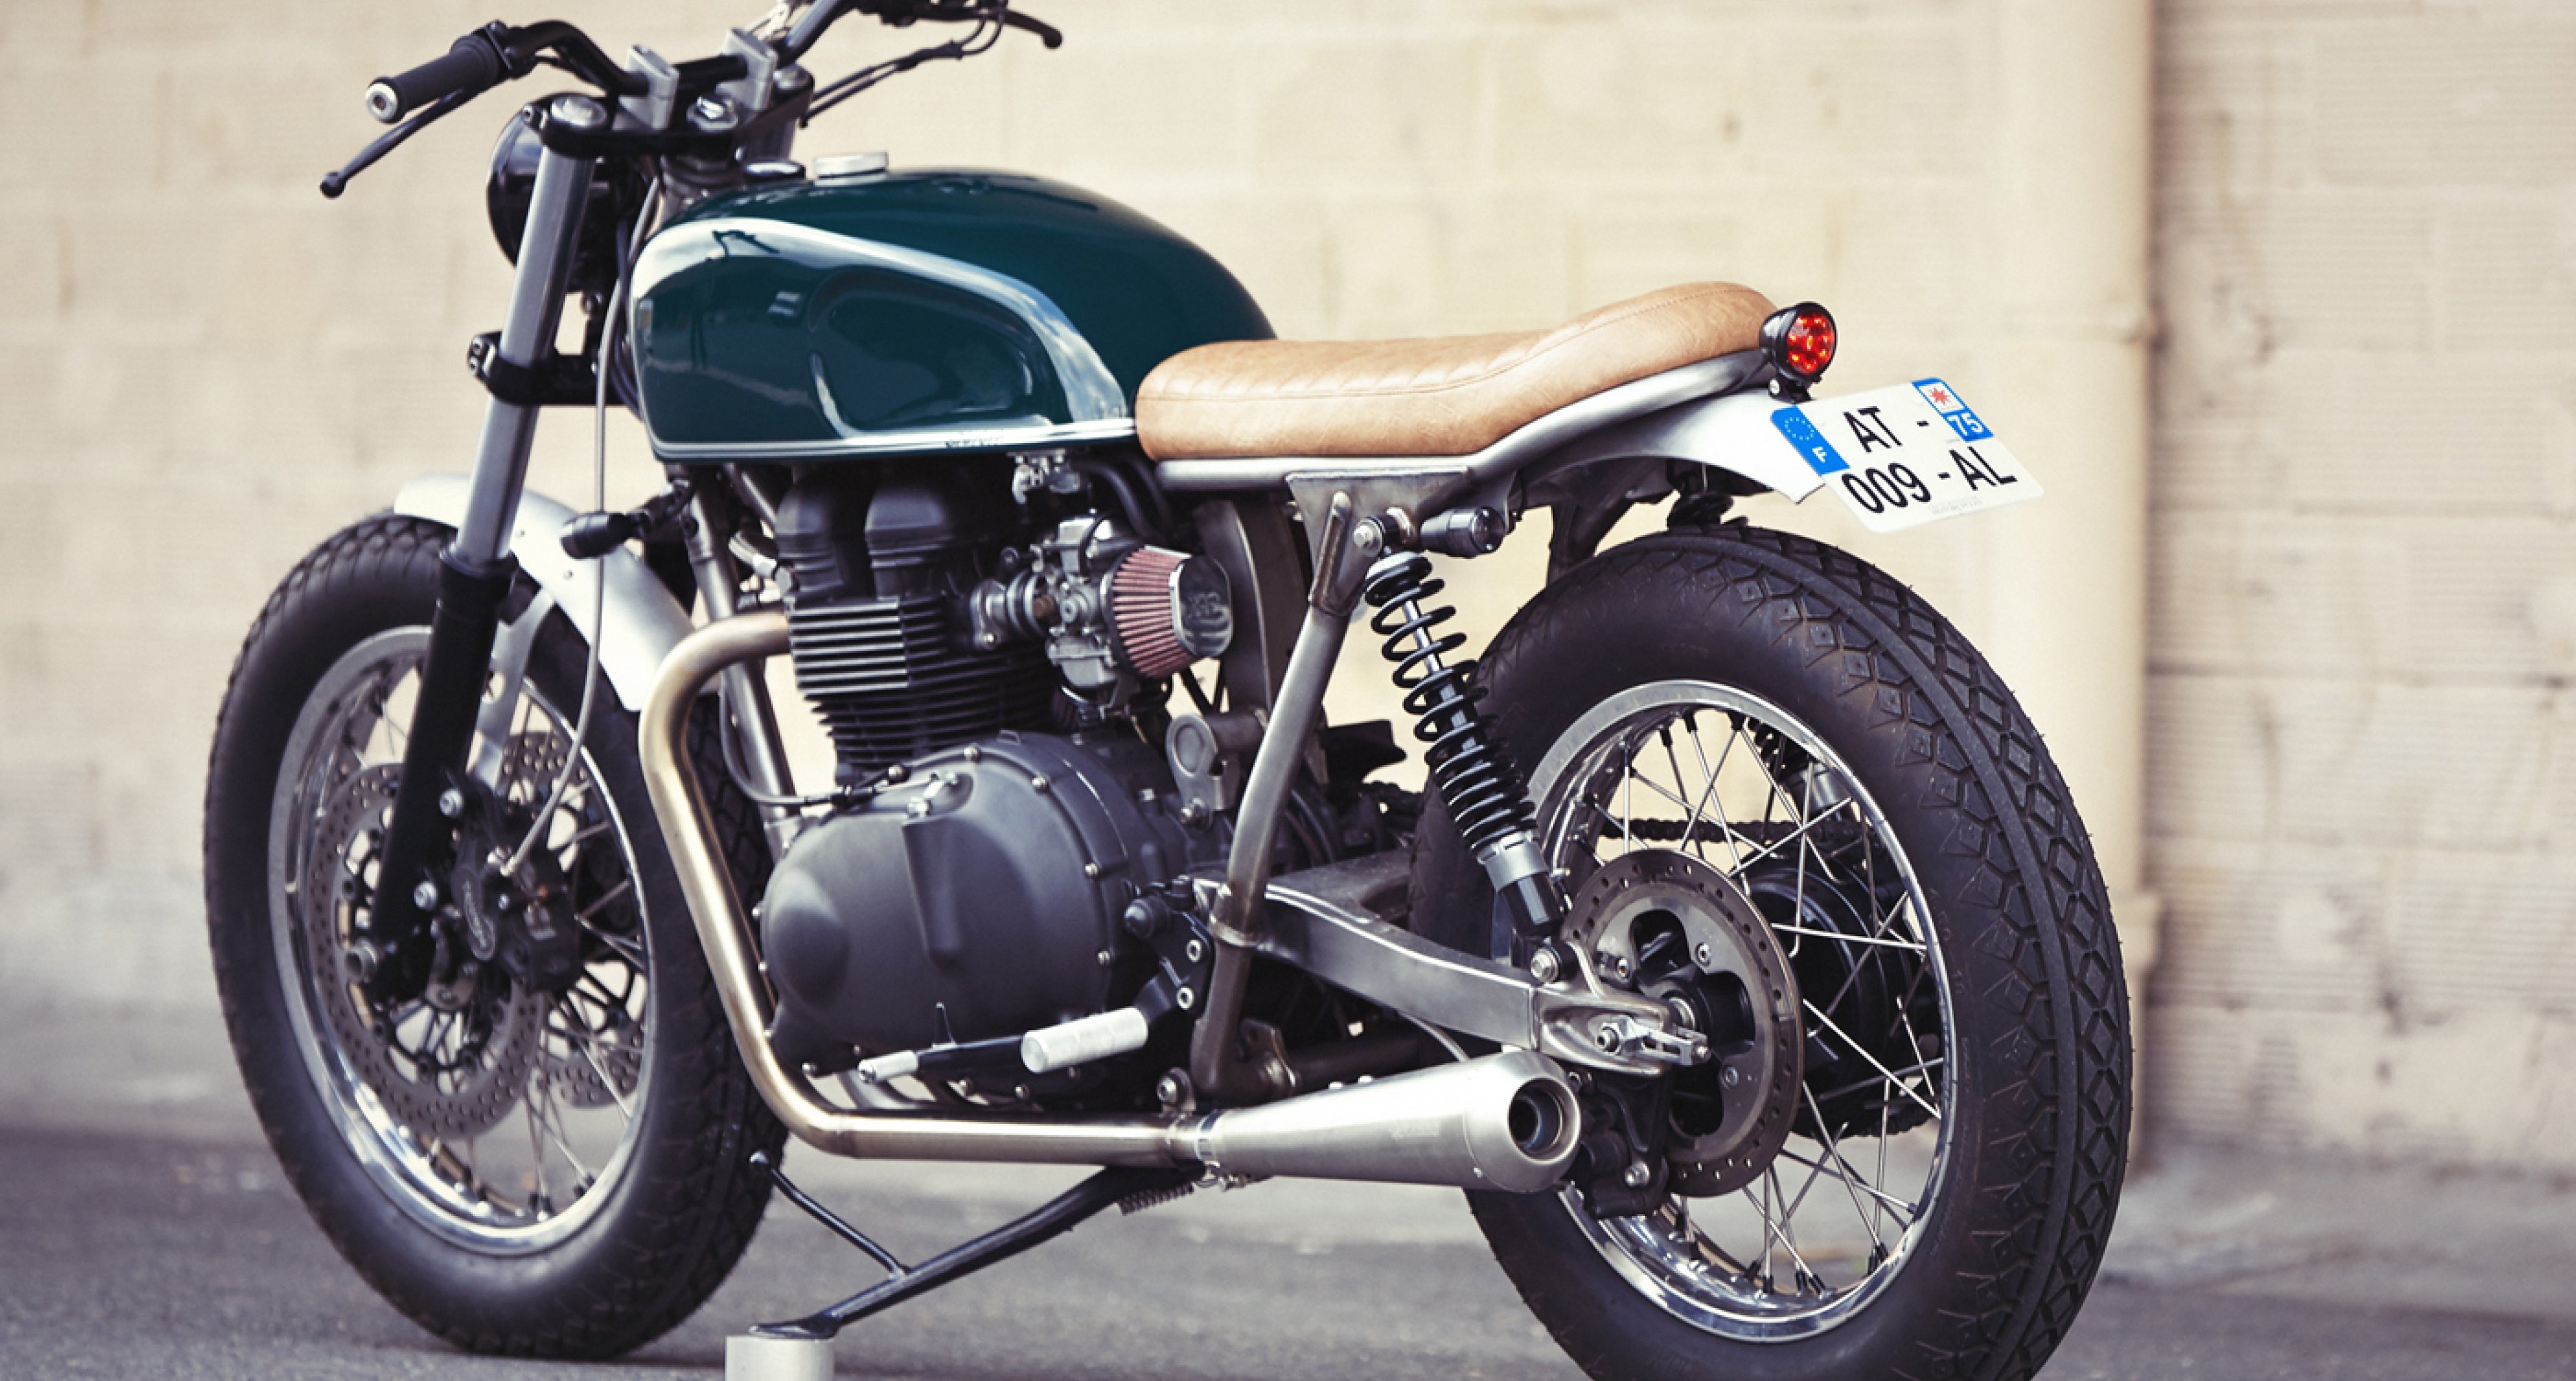 This Custom Triumph Bonneville T100 Was Designed To Stand Out Classic Driver Magazine